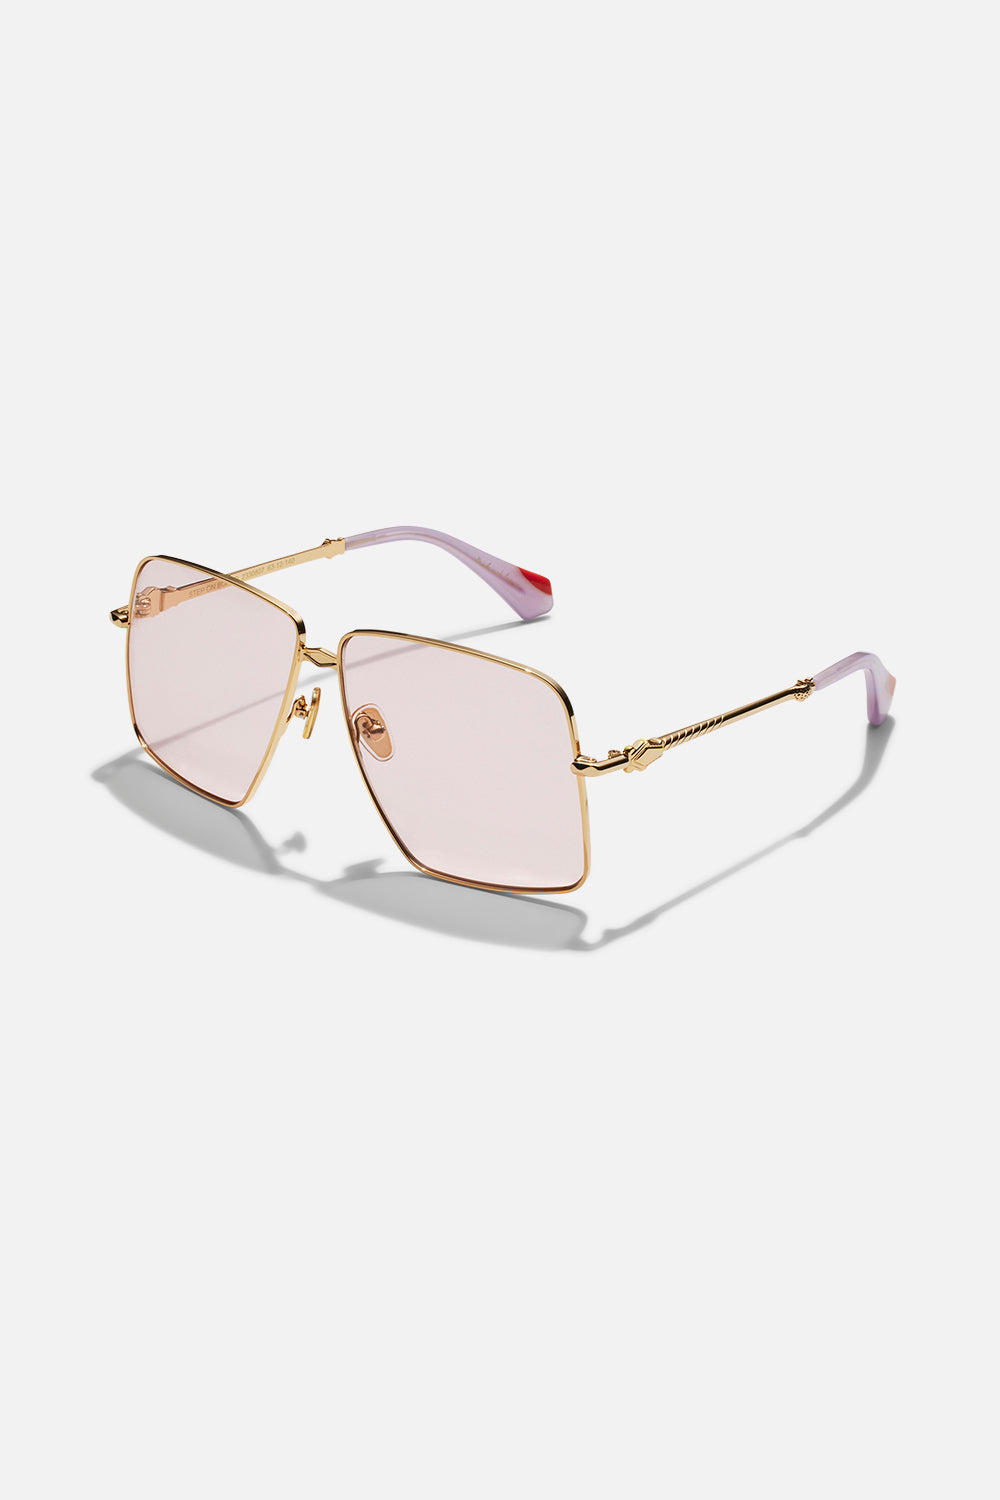 Step On Board Sunglasses  pink lens and gold frame by CAMILLA